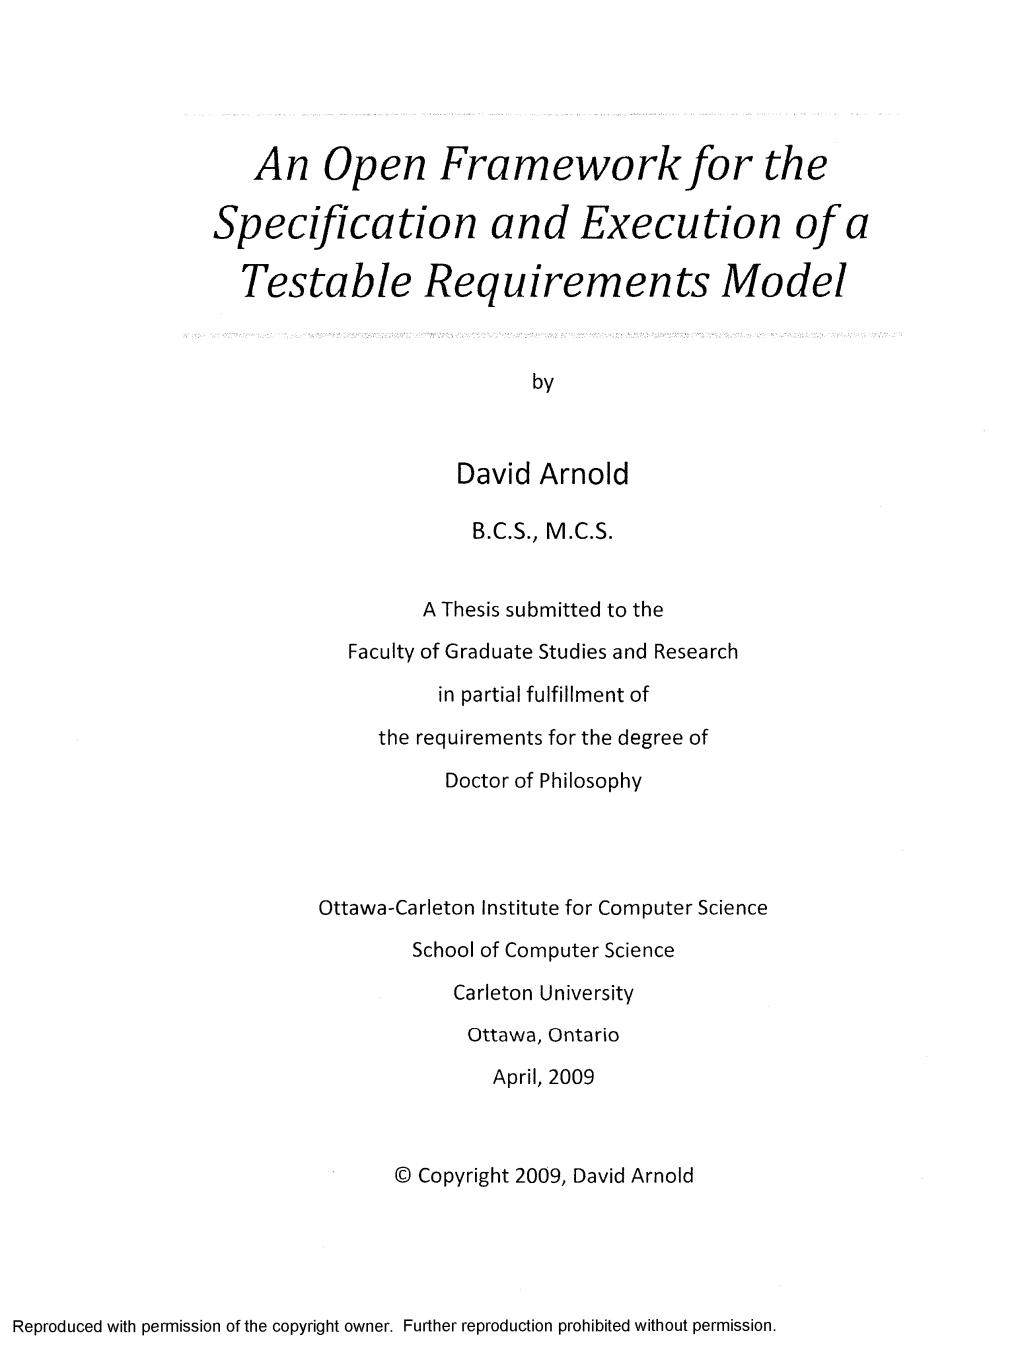 An Open Framework for the Specification and Execution of a Testable Requirements Model